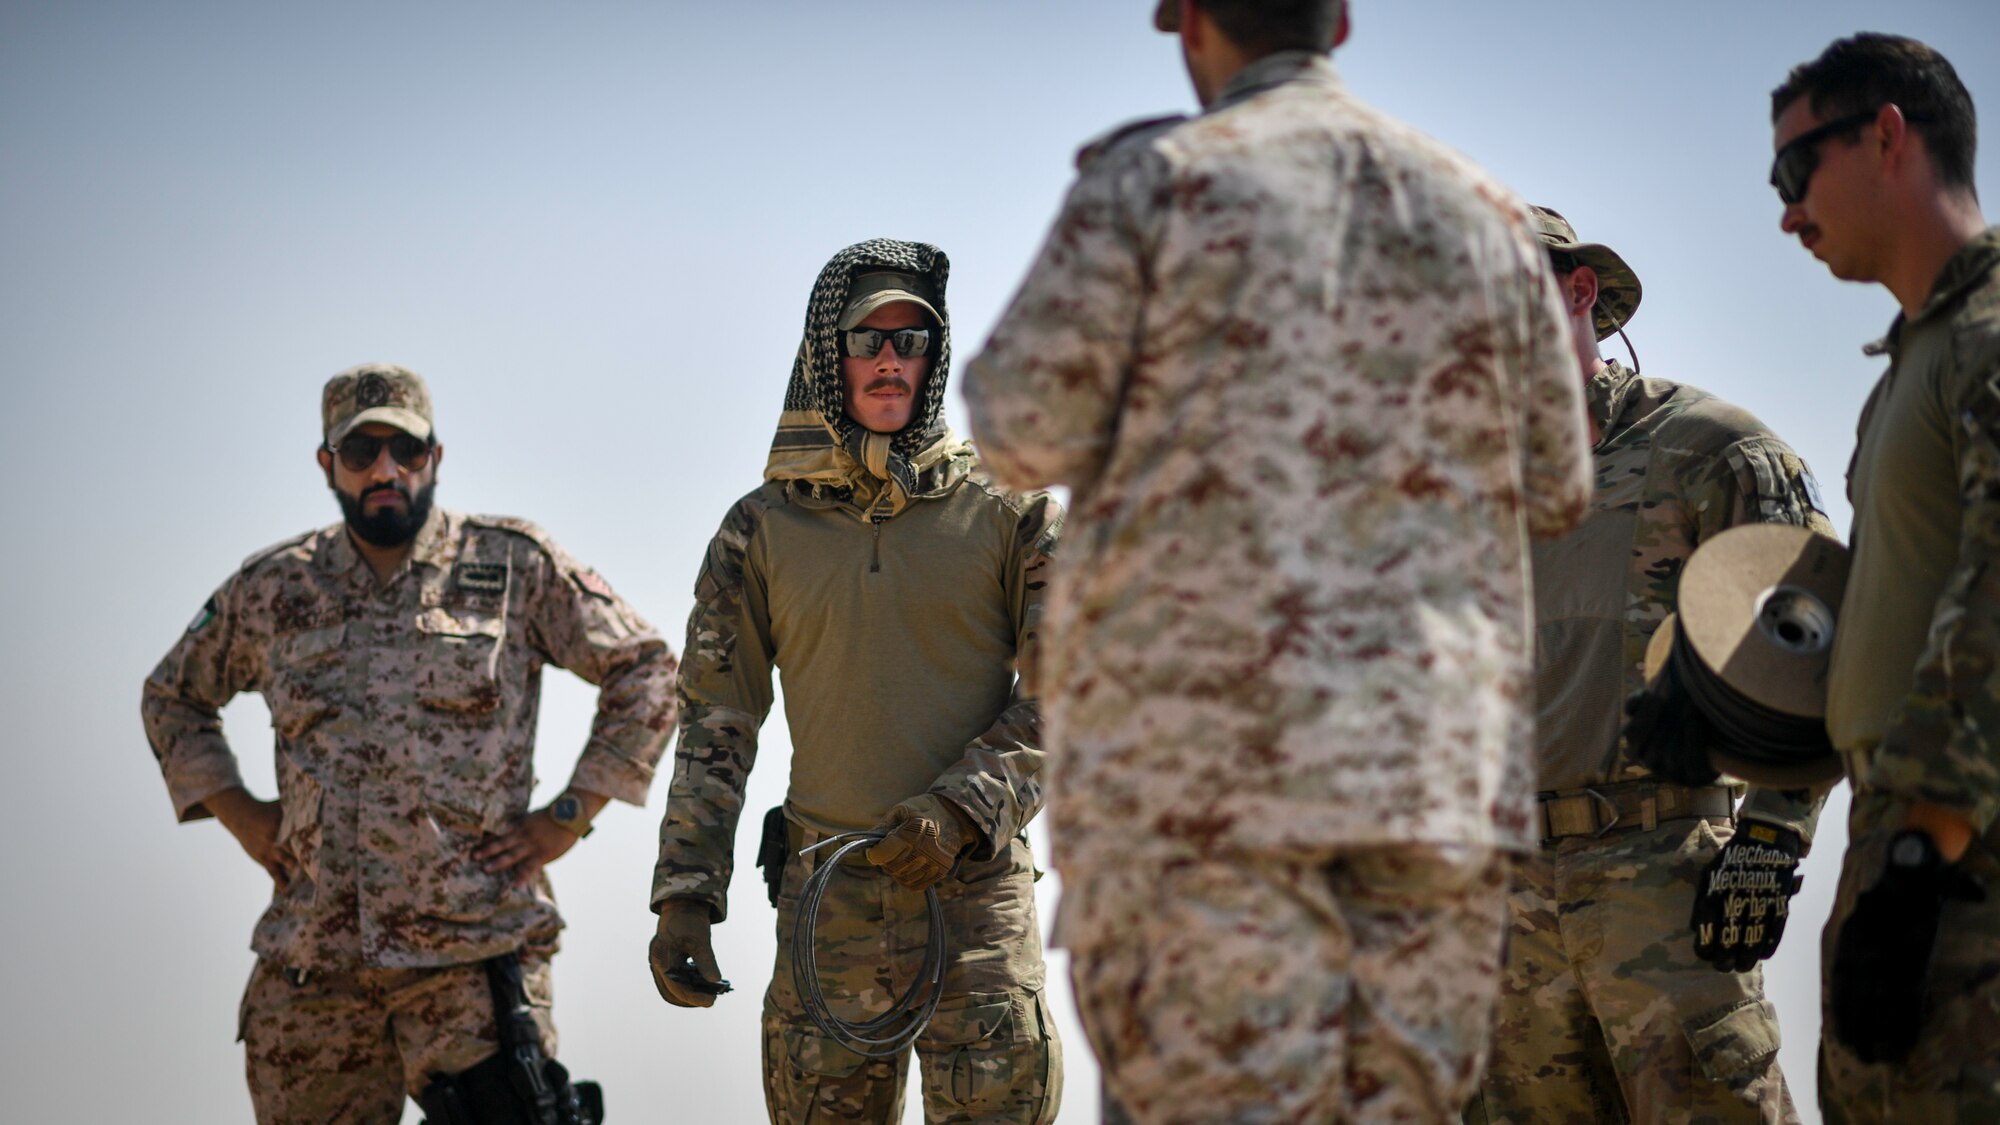 U.S. Army and Kuwaiti Ministry of Defense EOD technicians discuss insensitive high explosive munitions detonation techniques before a munitions disposal training at the Udari Range, Kuwait Sept. 30, 2019. The training was designed for U.S. and Kuwaiti forces to share techniques, synchronize capabilities and build partnerships.